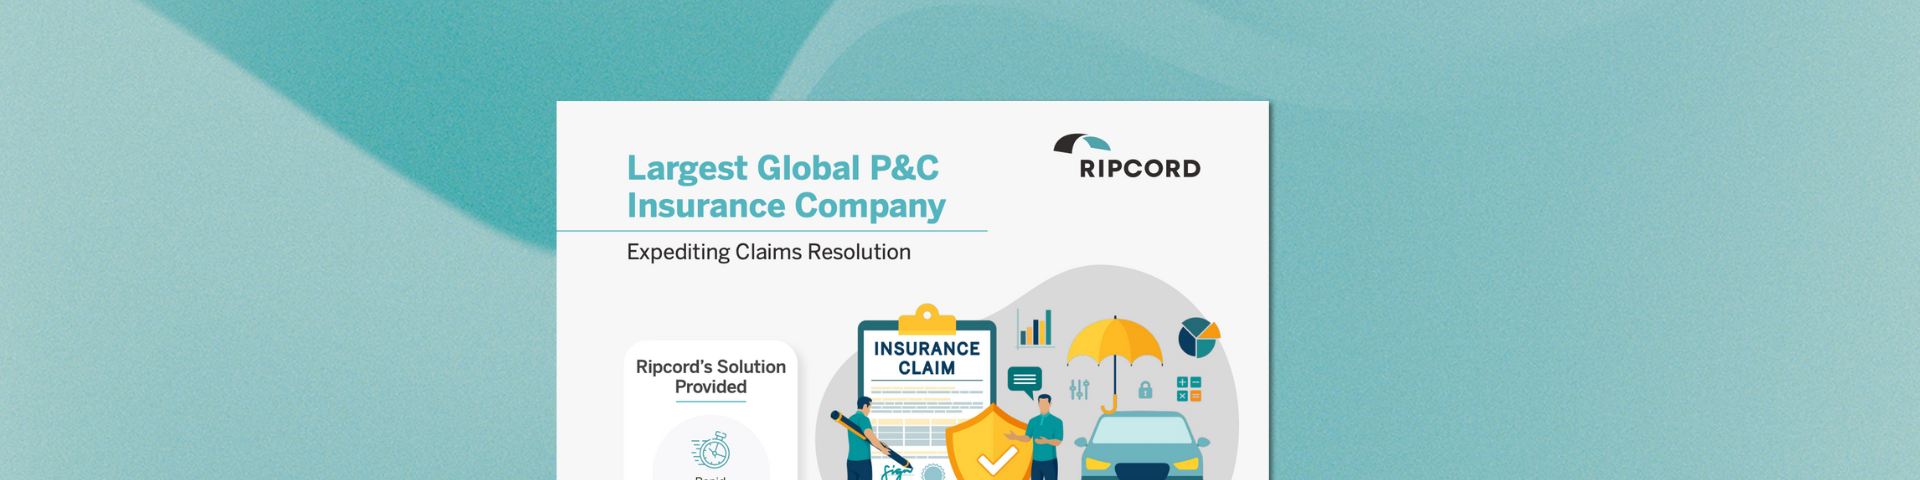 Property & Casualty Insurance Case Study - Ripcord